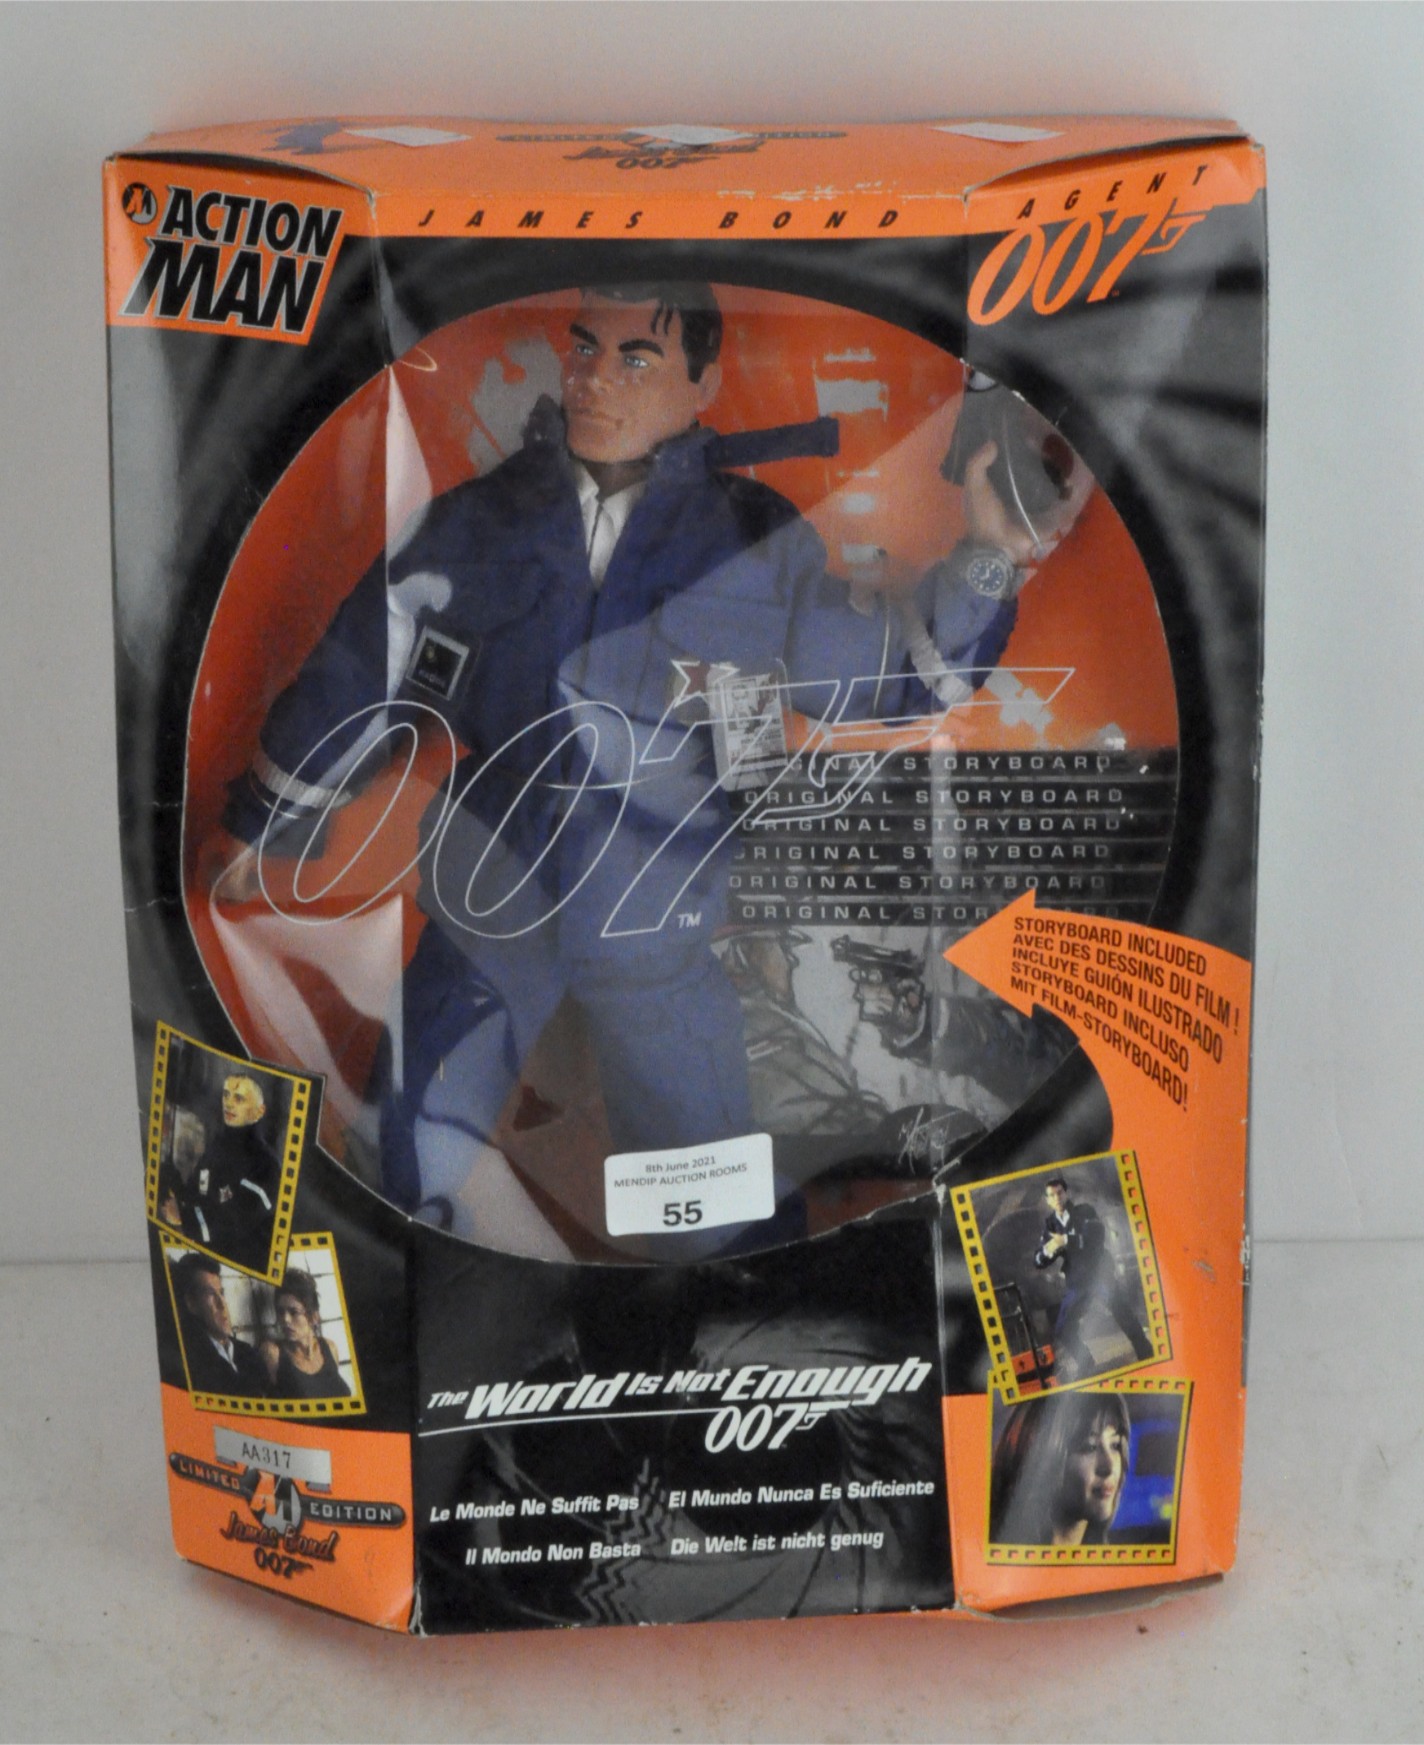 A James Bond Action Man figure from "The world is Not Enough" in original box